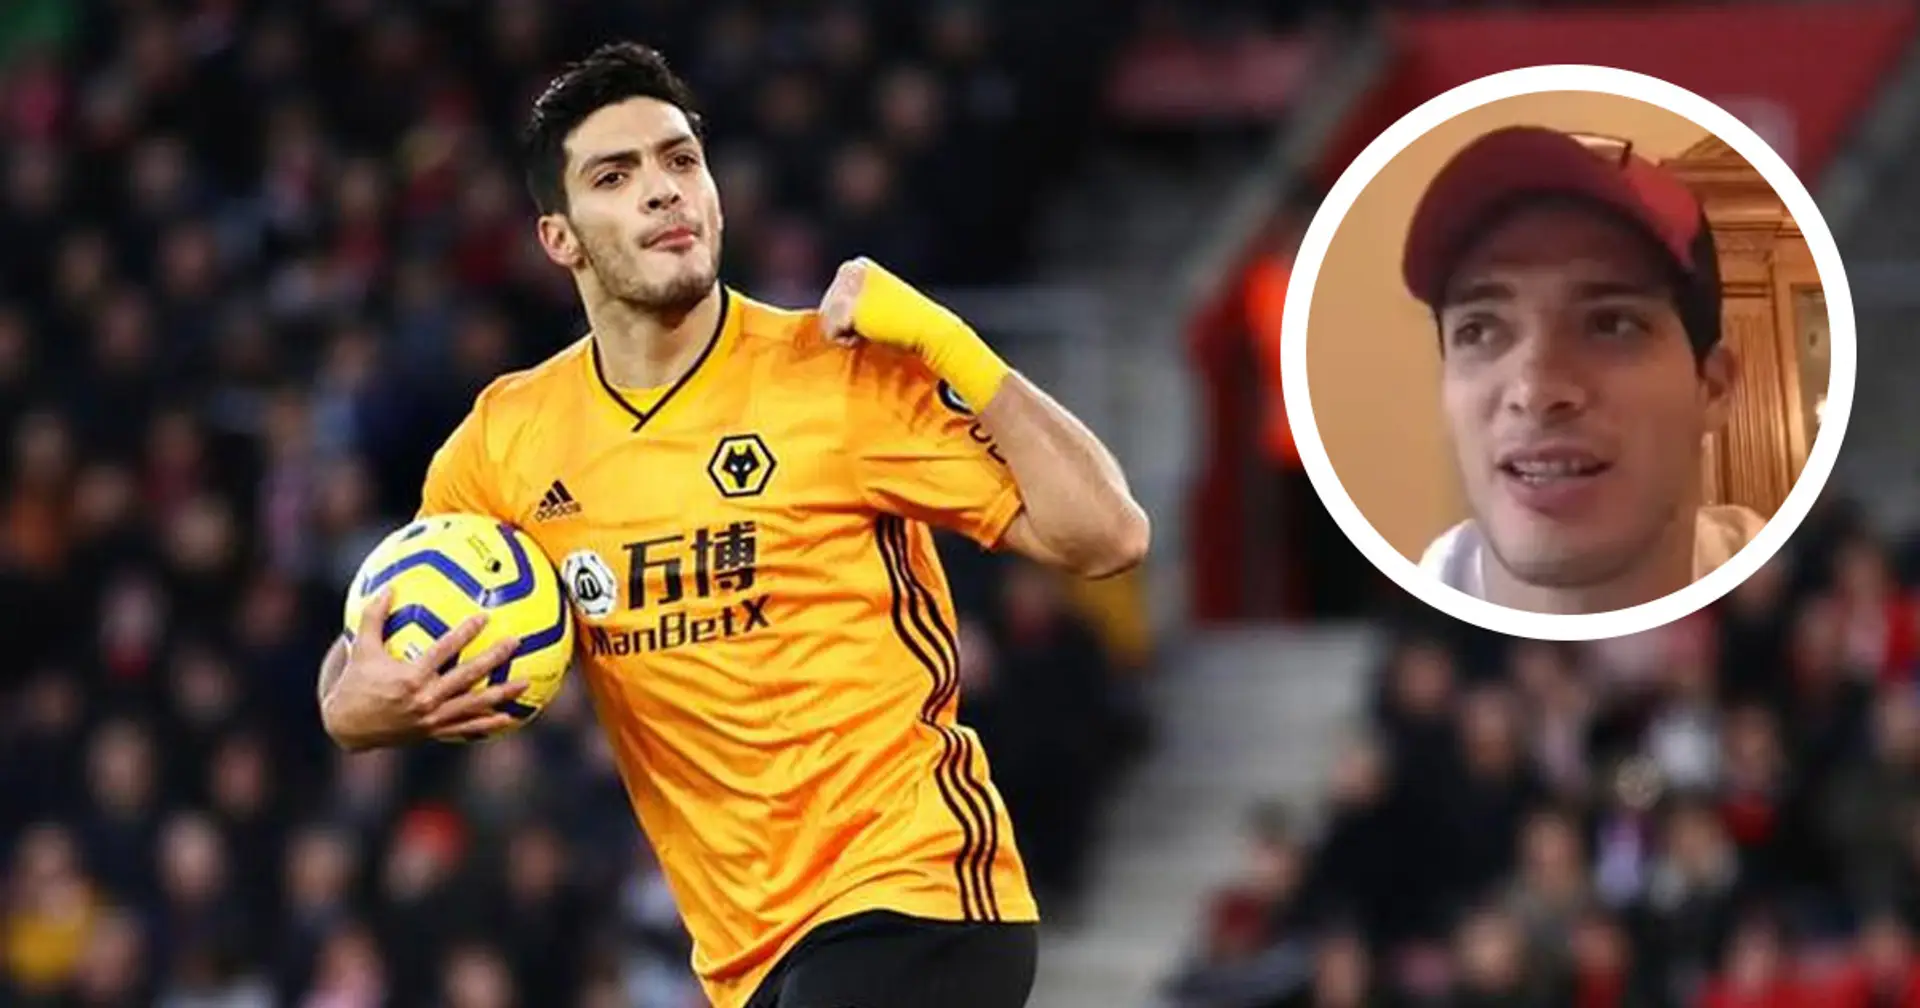 'It is something very cool': Raul Jimenez loves being linked with Real Madrid and other top clubs